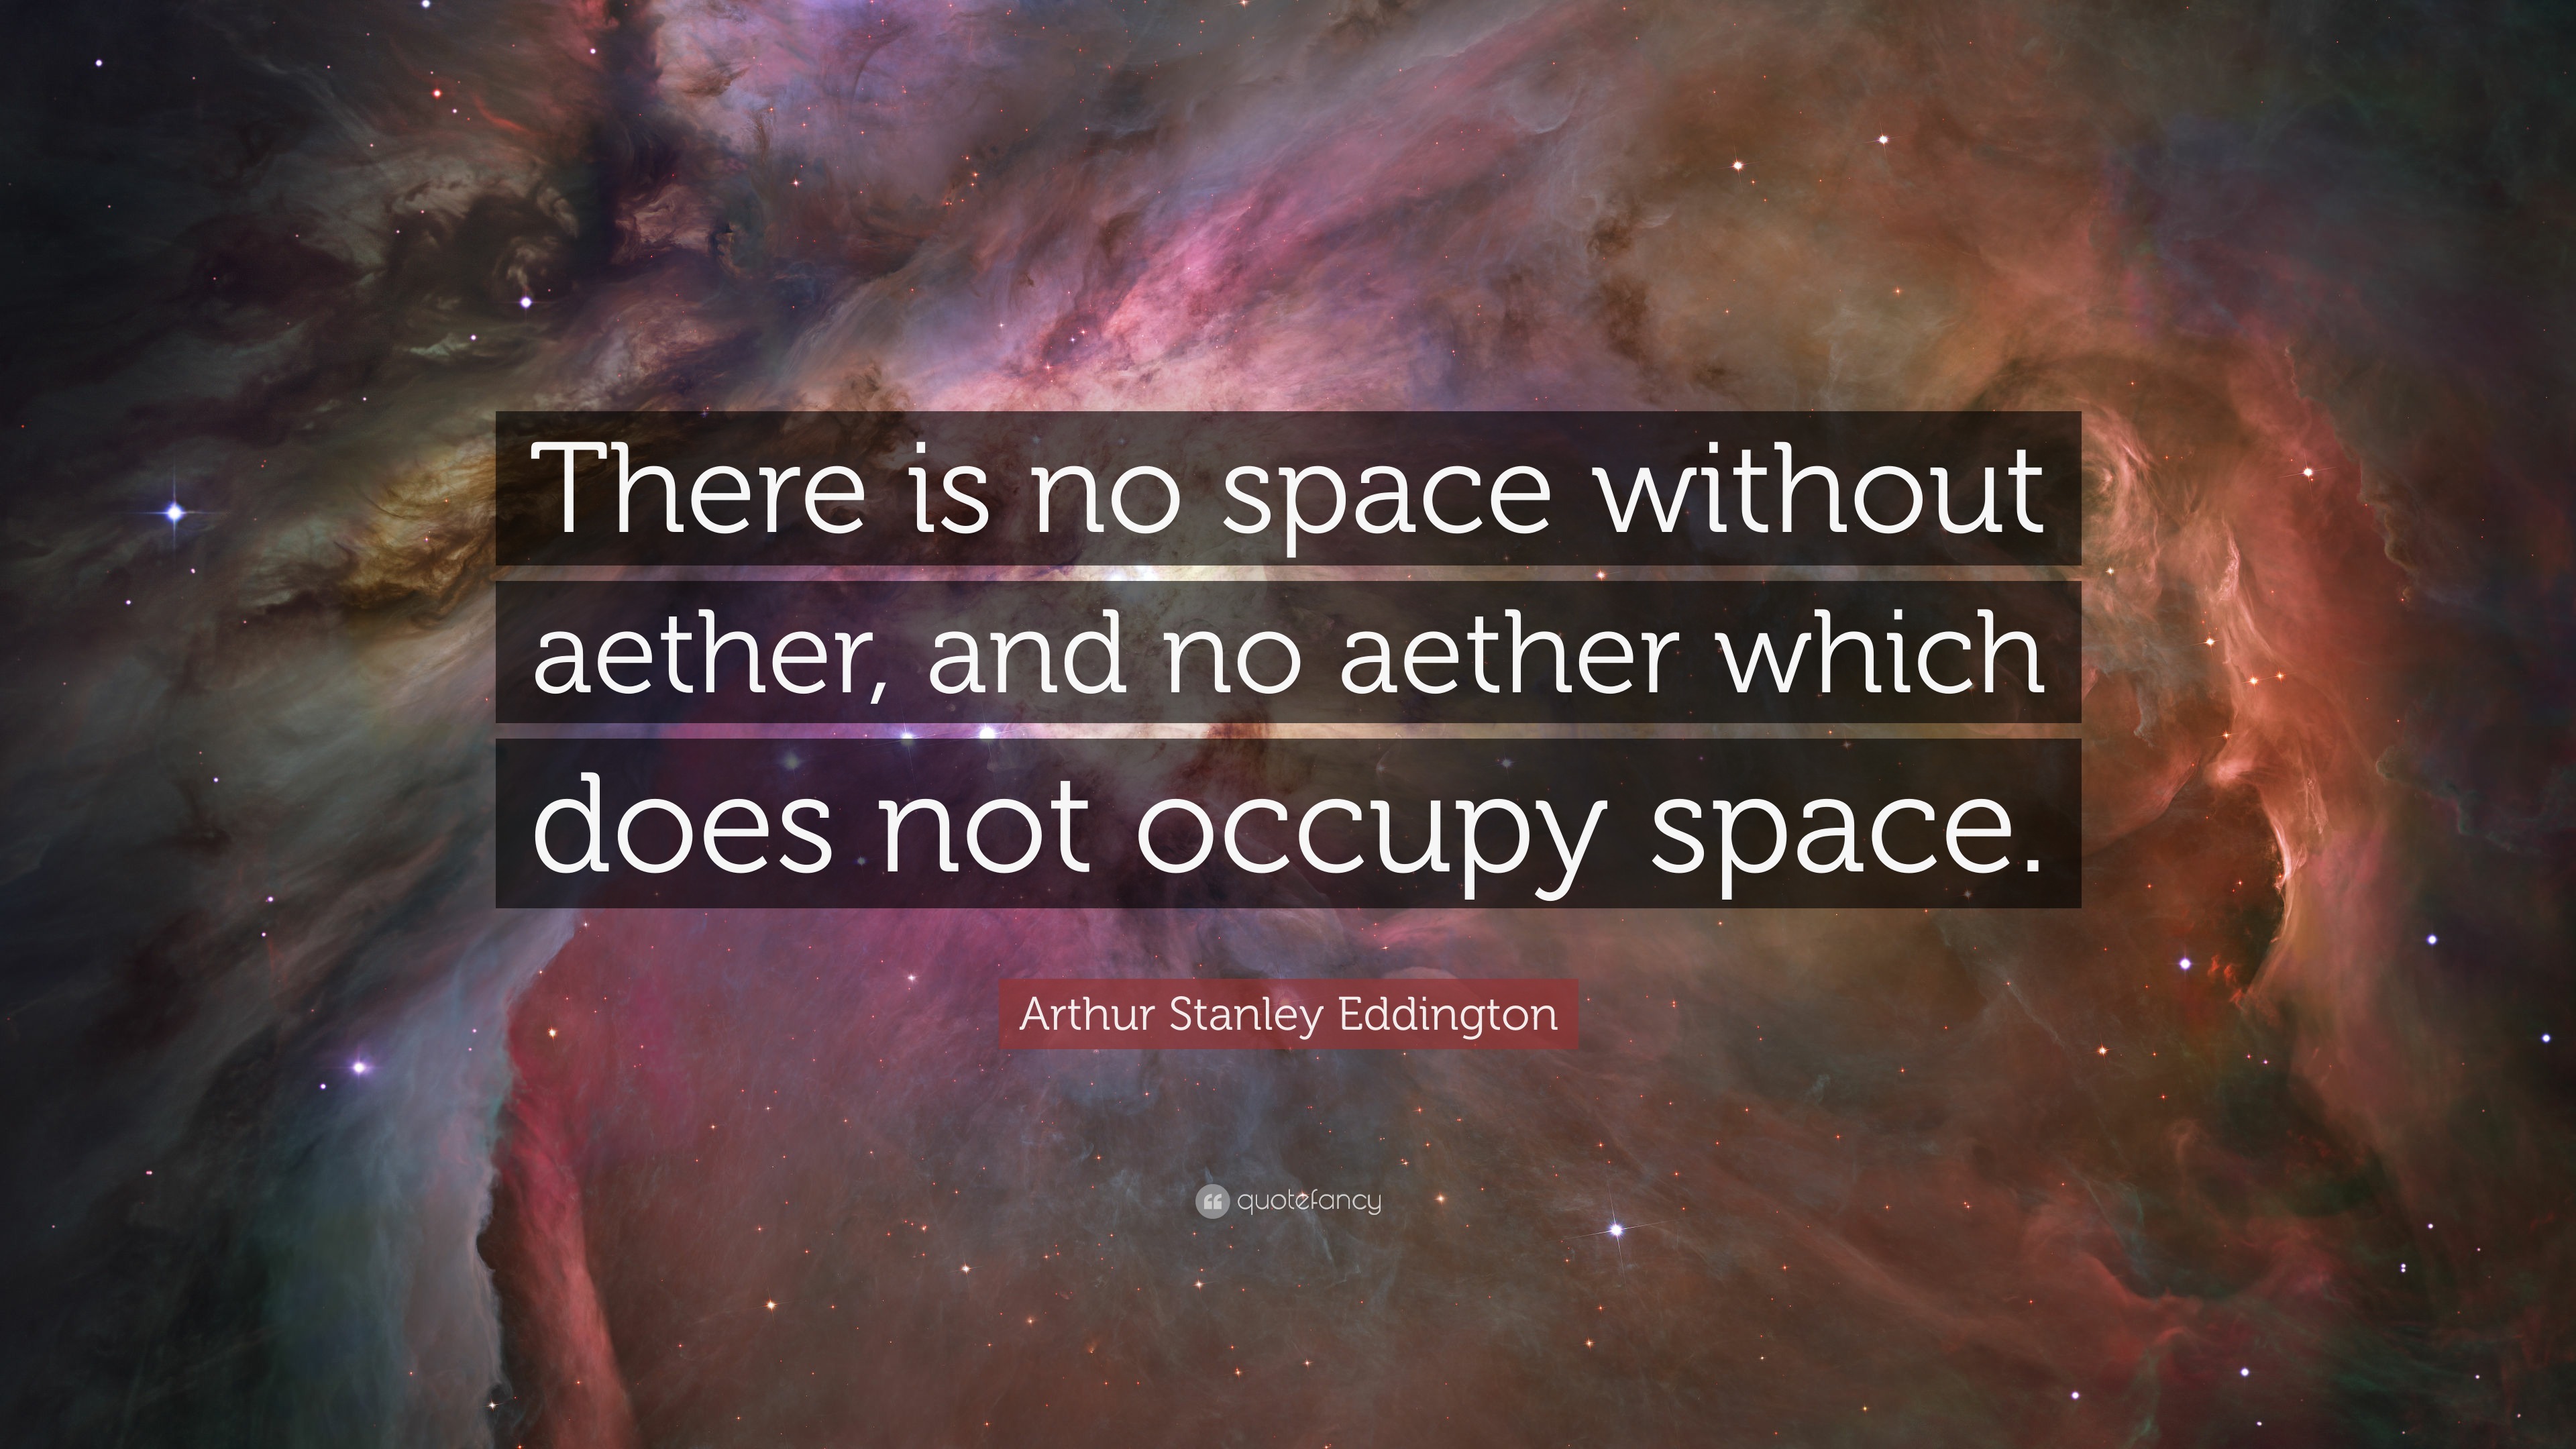 Arthur Stanley Eddington Quote: “There is no space without aether, and ...